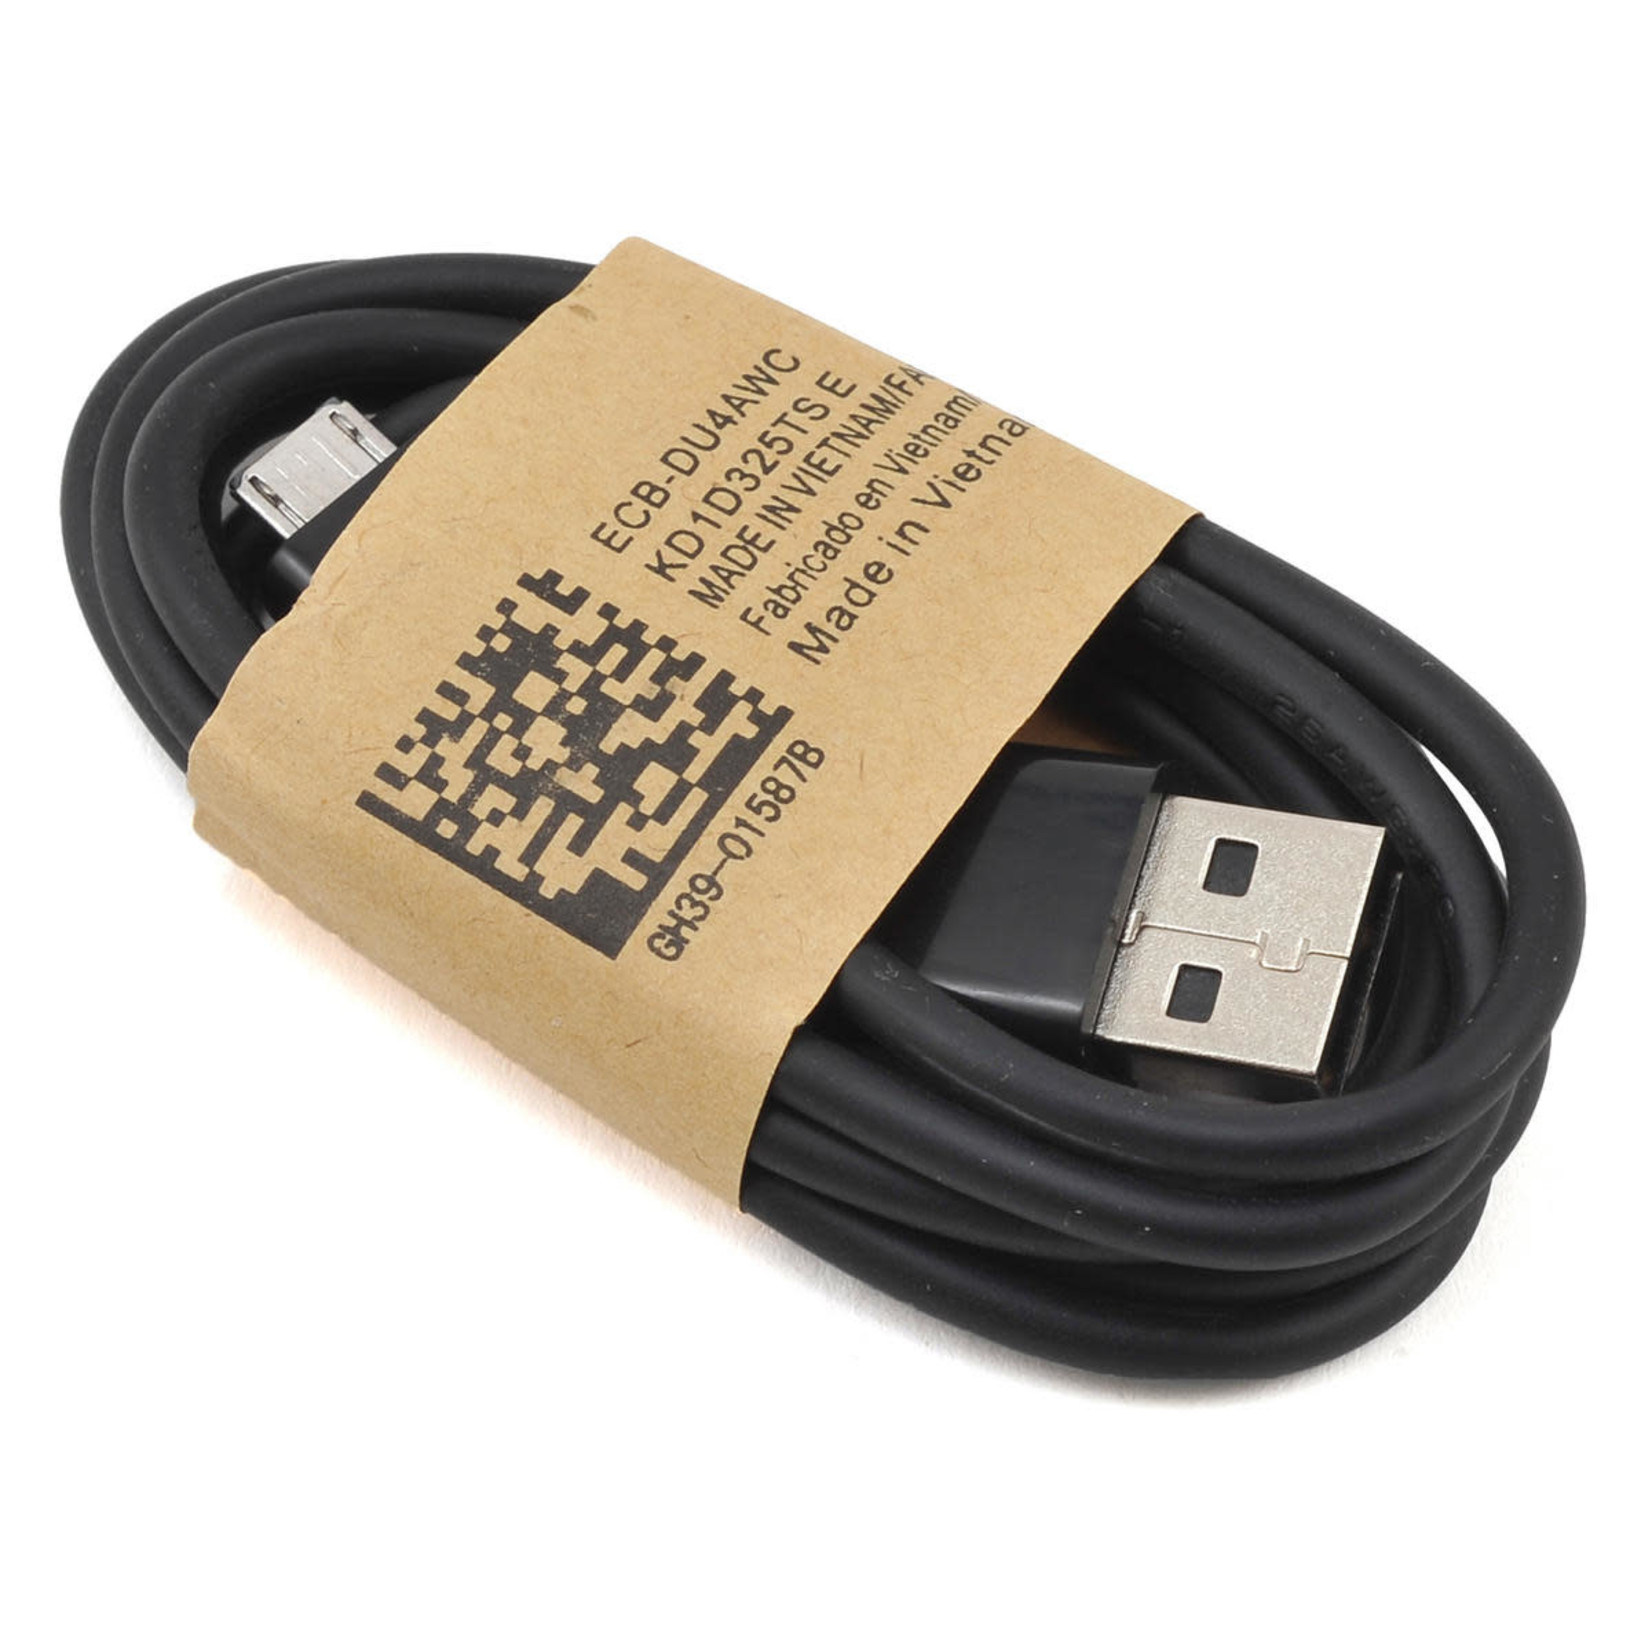 Maclan Maclan USB Data Cable #MCL4054